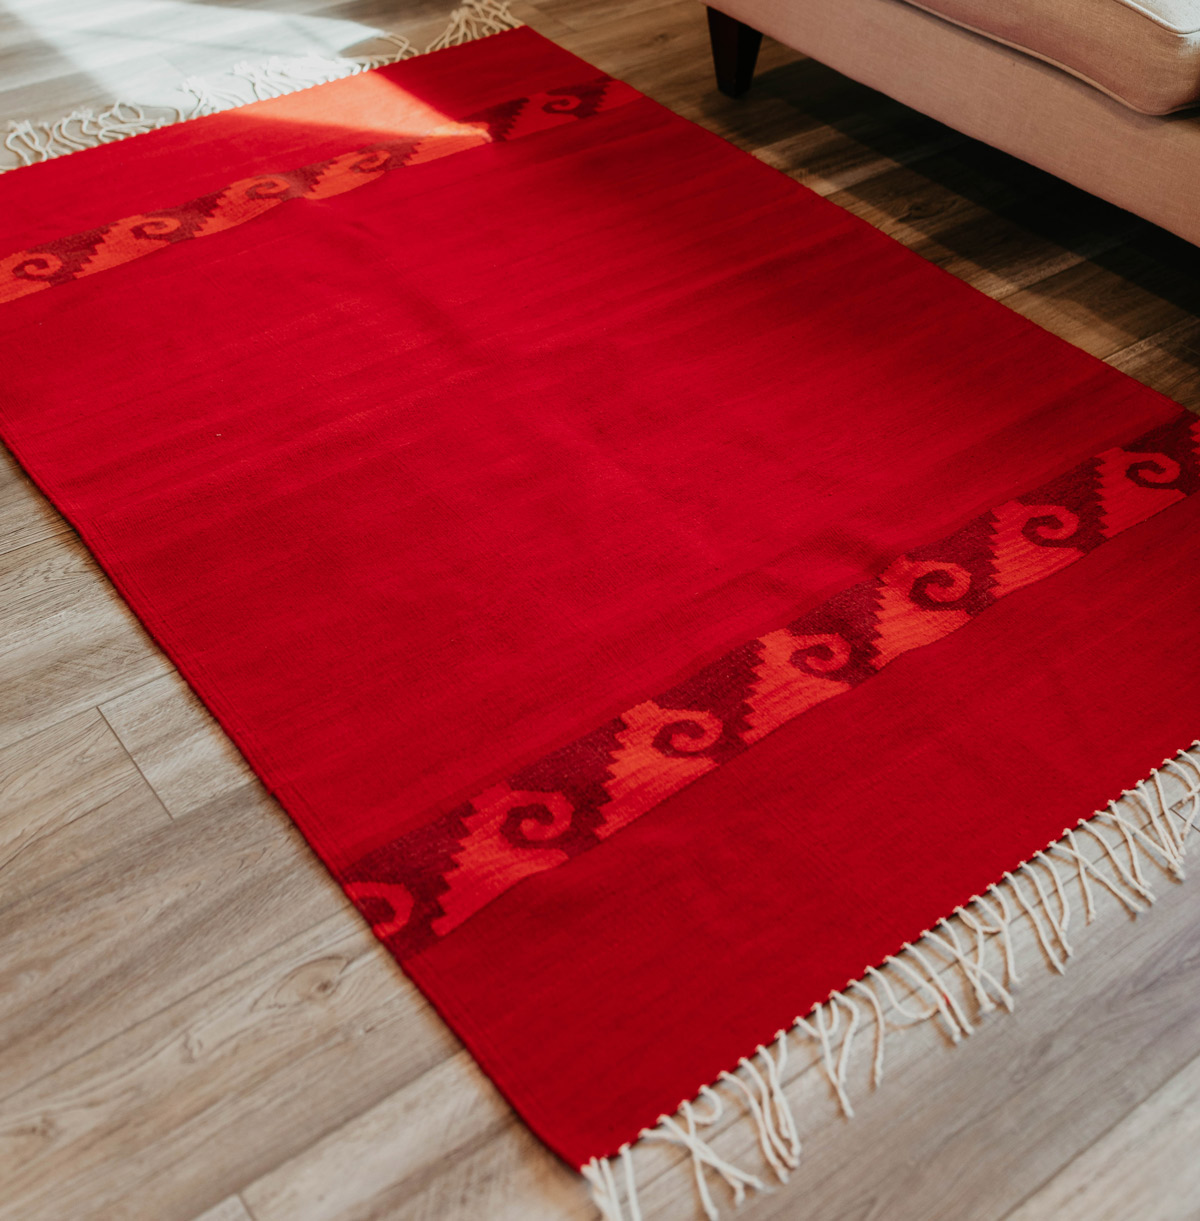 Red rug with wave pattern made in Oaxaca, Mexico